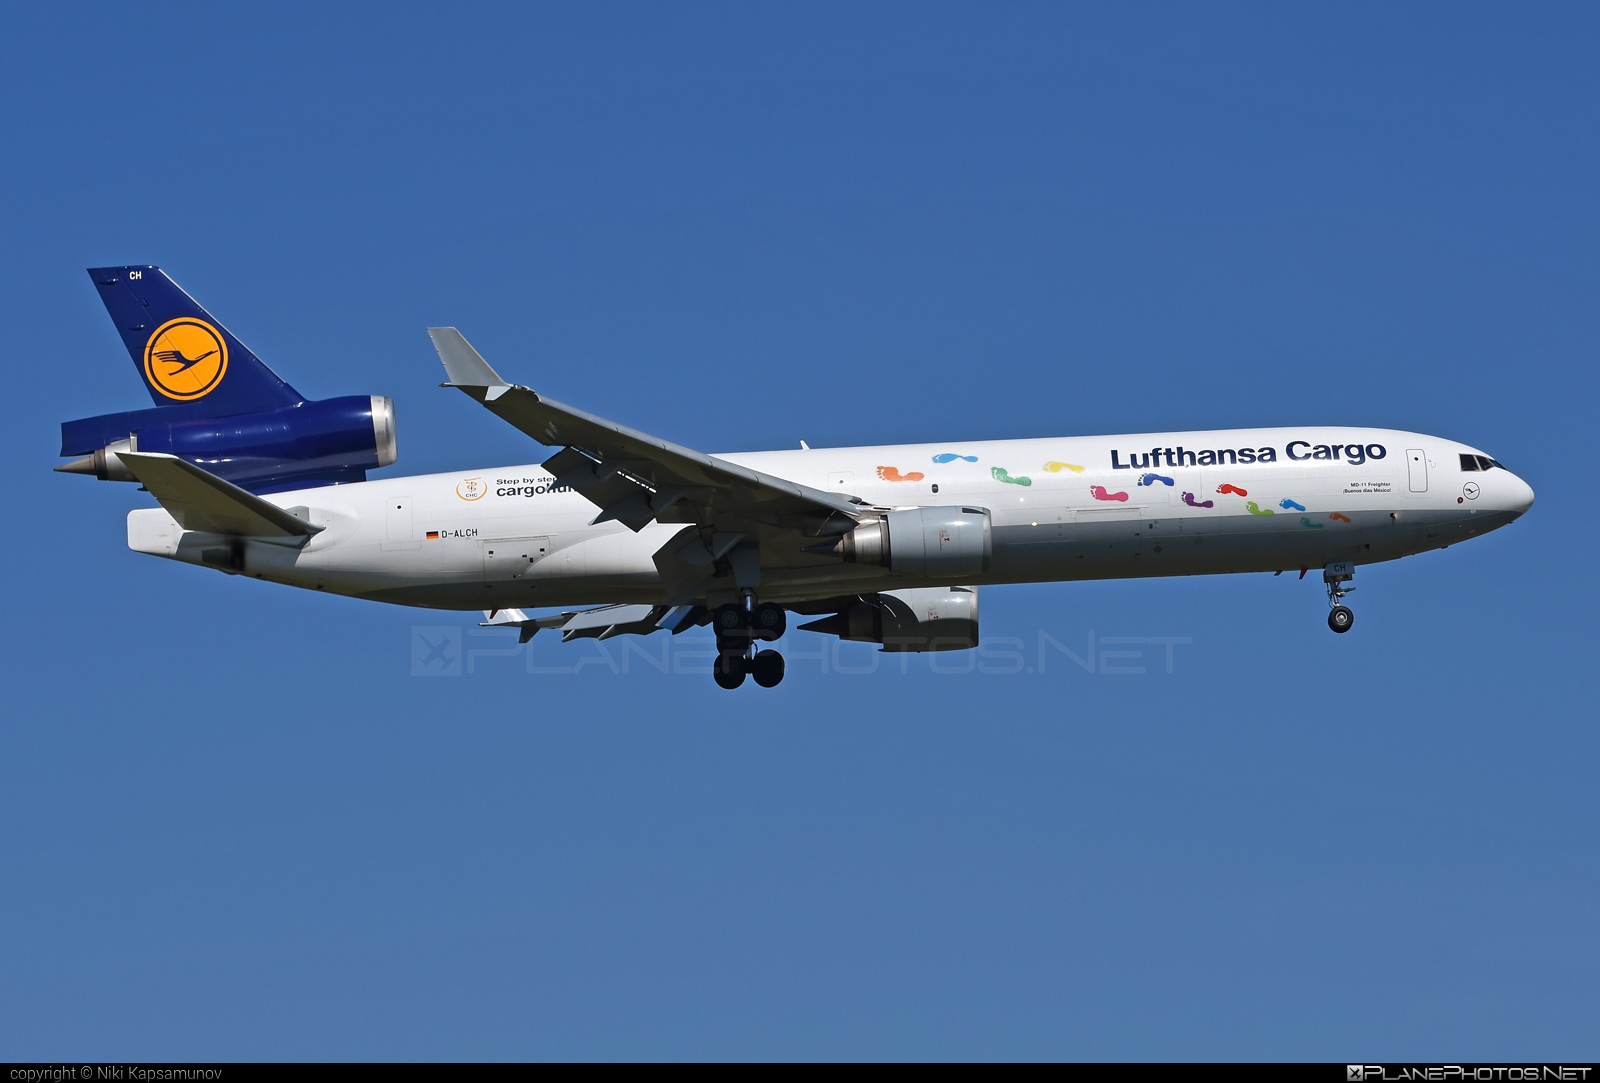 McDonnell Douglas MD-11F - D-ALCH operated by Lufthansa Cargo #lufthansa #lufthansacargo #mcDonnellDouglas #mcdonnelldouglas11 #mcdonnelldouglas11f #mcdonnelldouglasmd11 #mcdonnelldouglasmd11f #md11 #md11f